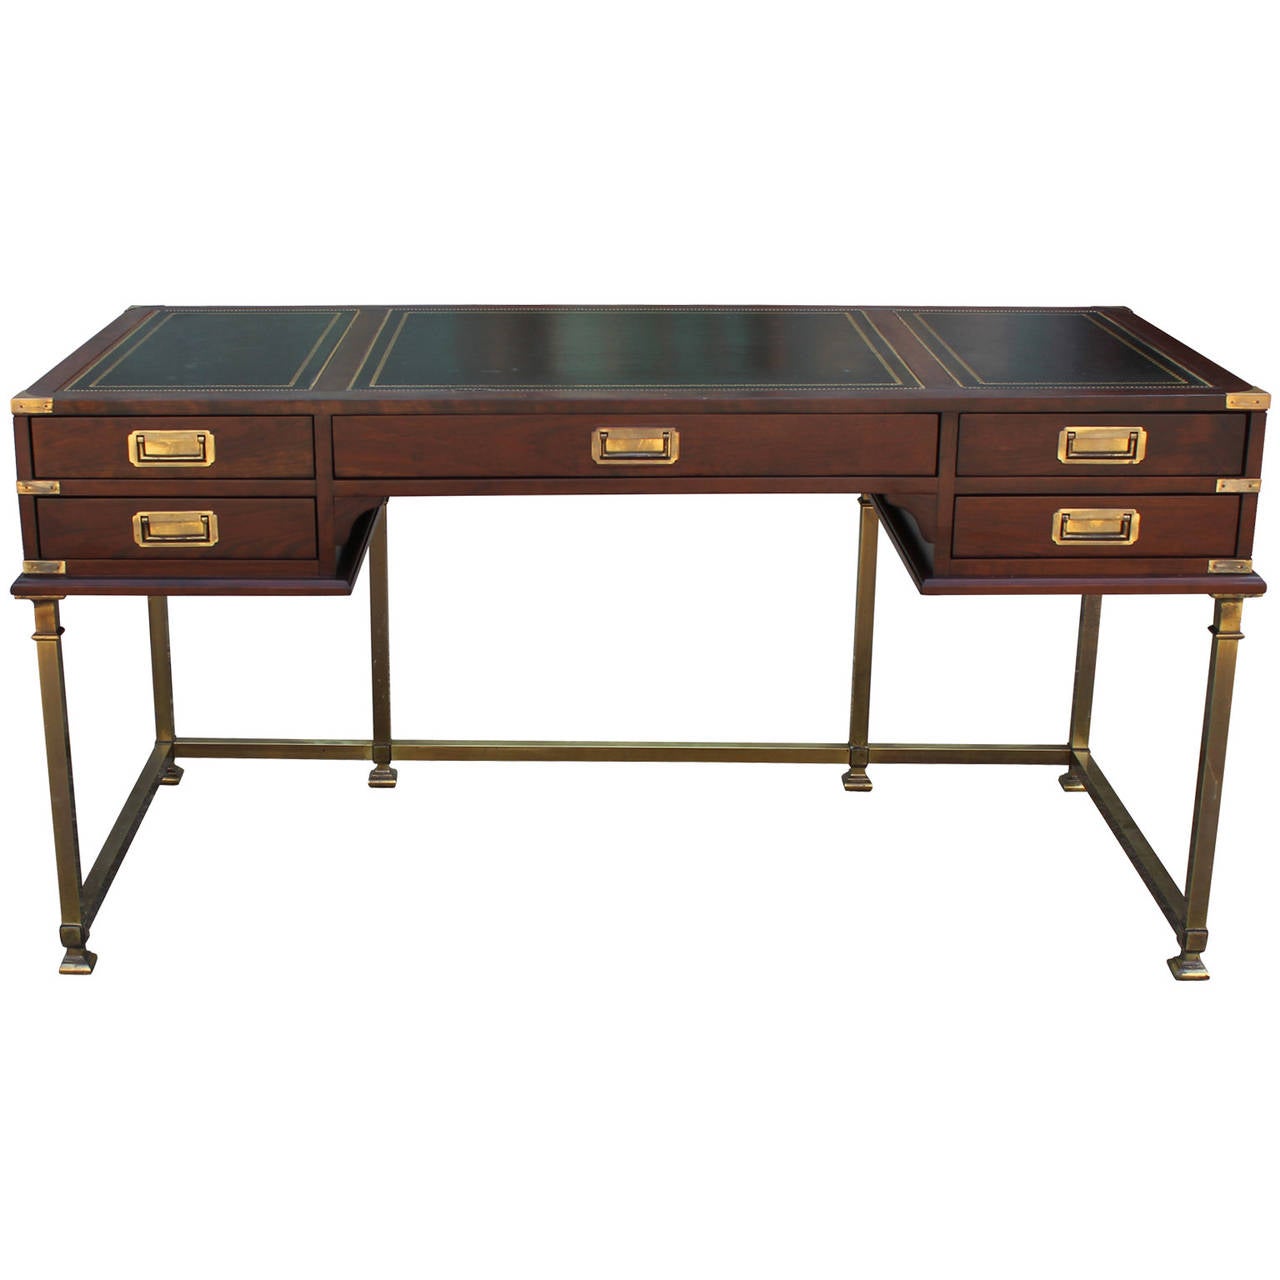 Excellent Campaign Style Desk With Brass Accents At 1stdibs